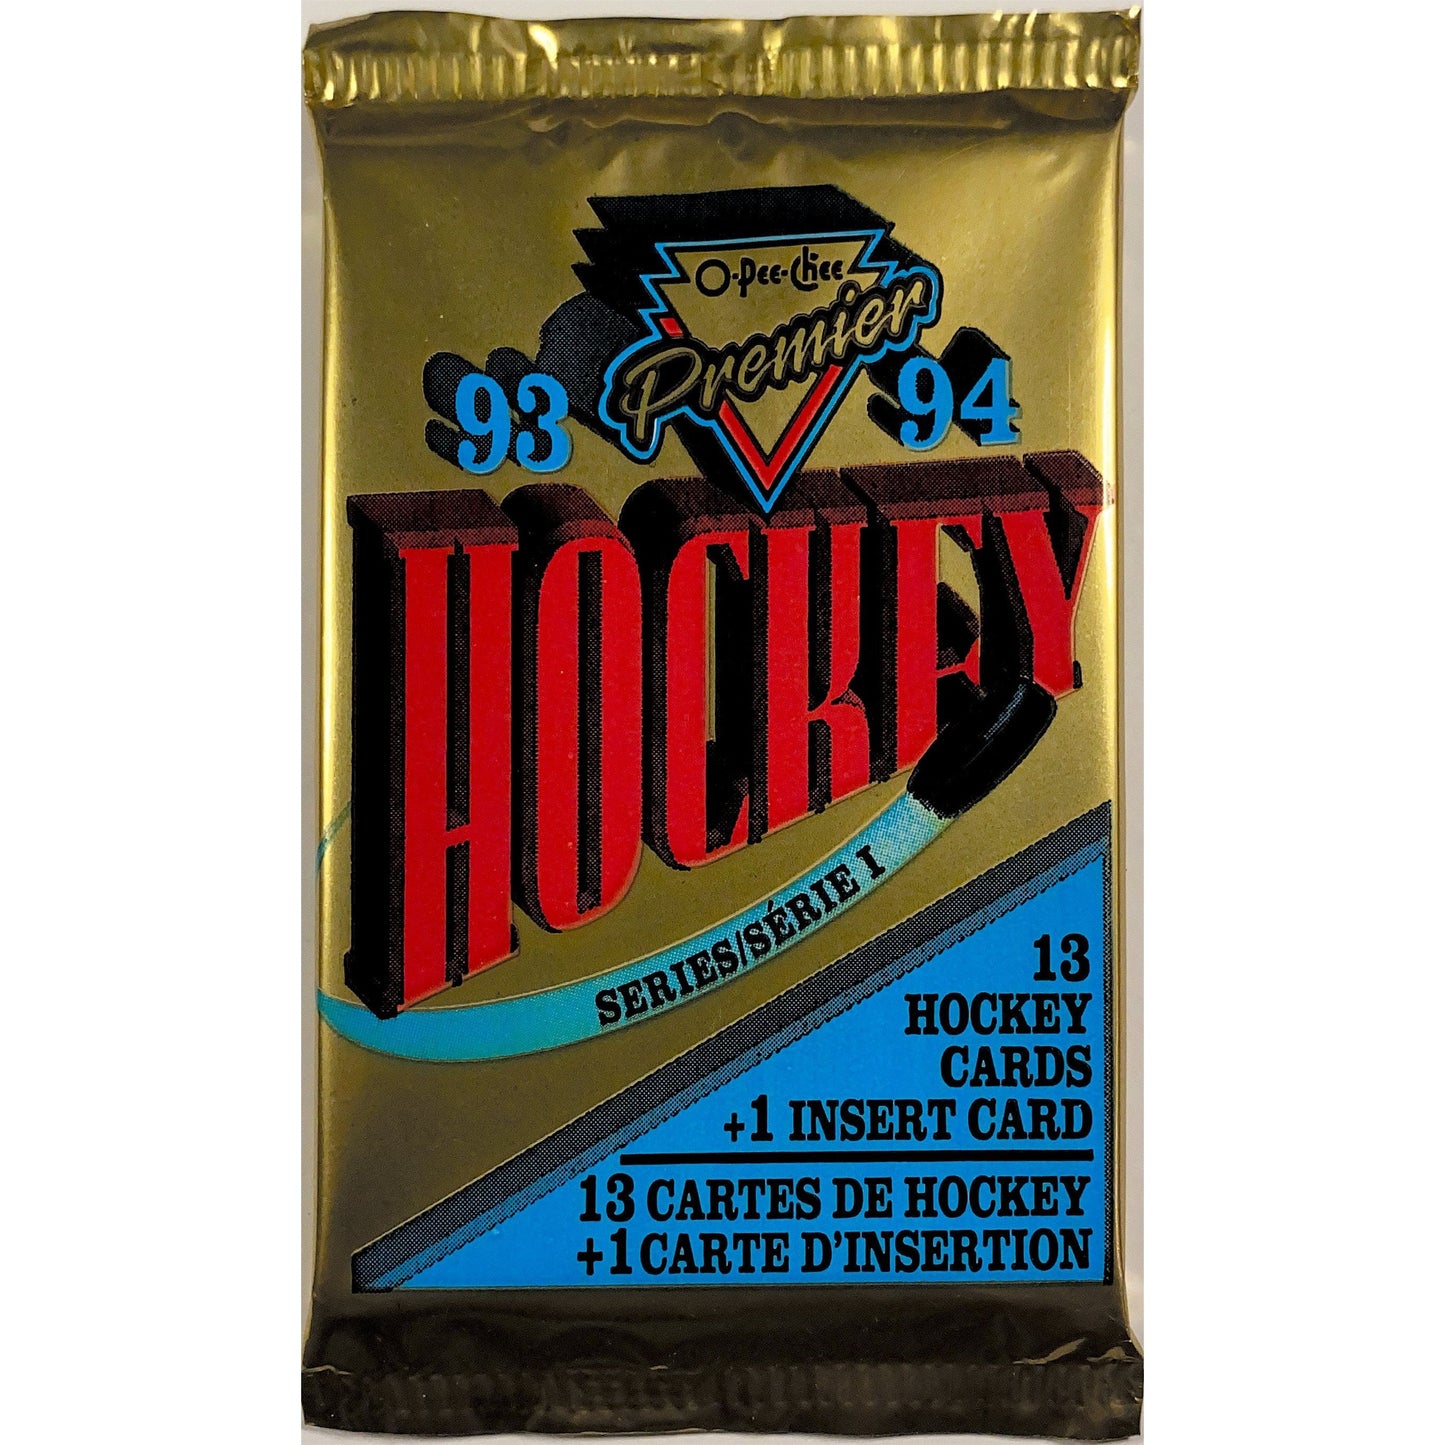  1993-94 O-Pee-Chee Premier Hockey Pack  Local Legends Cards & Collectibles